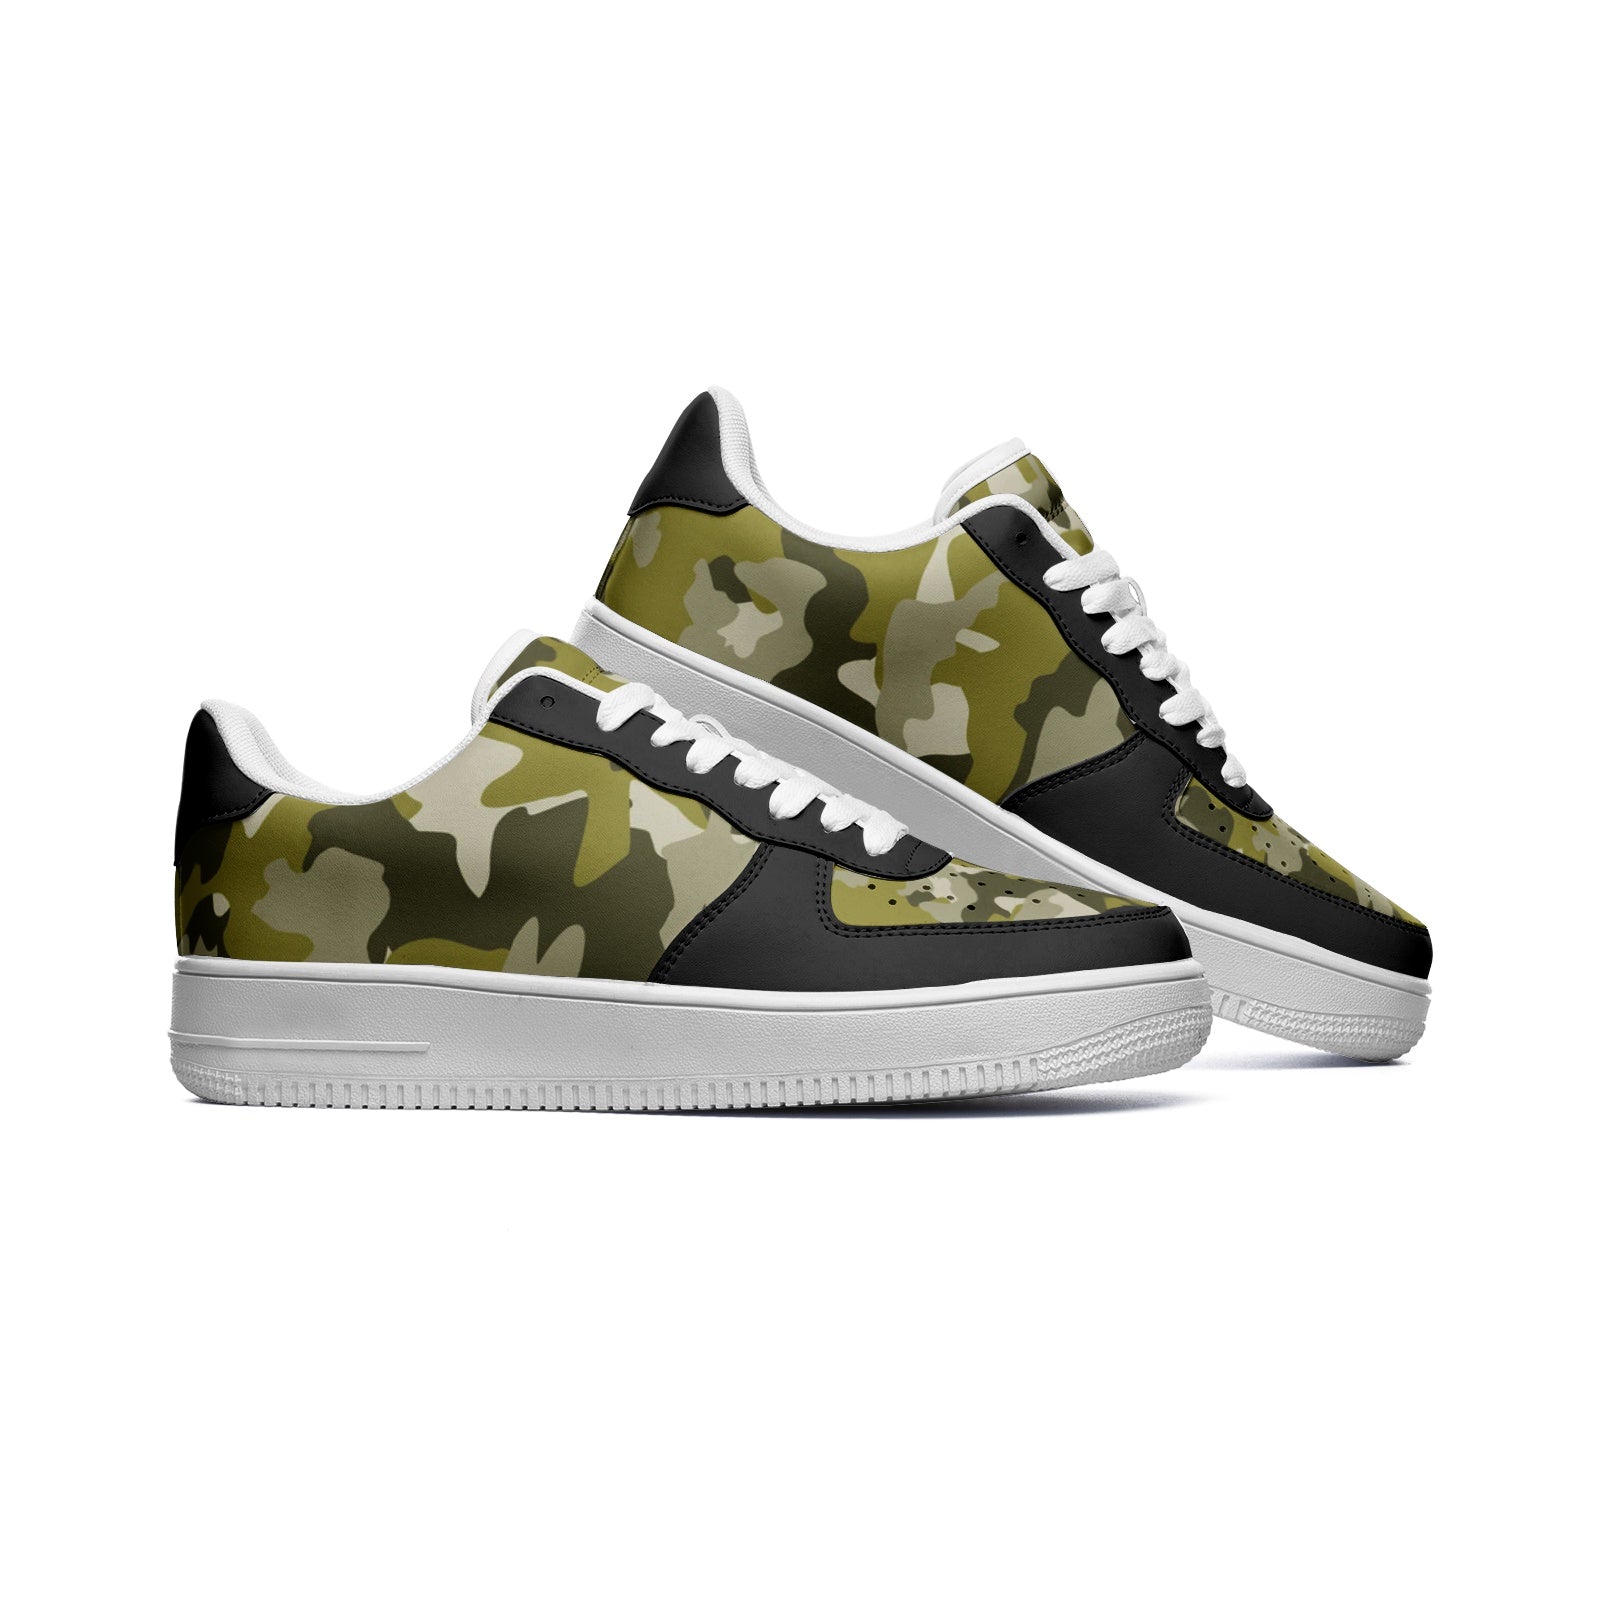 Unisex Low Top Camo Leather Sneakers